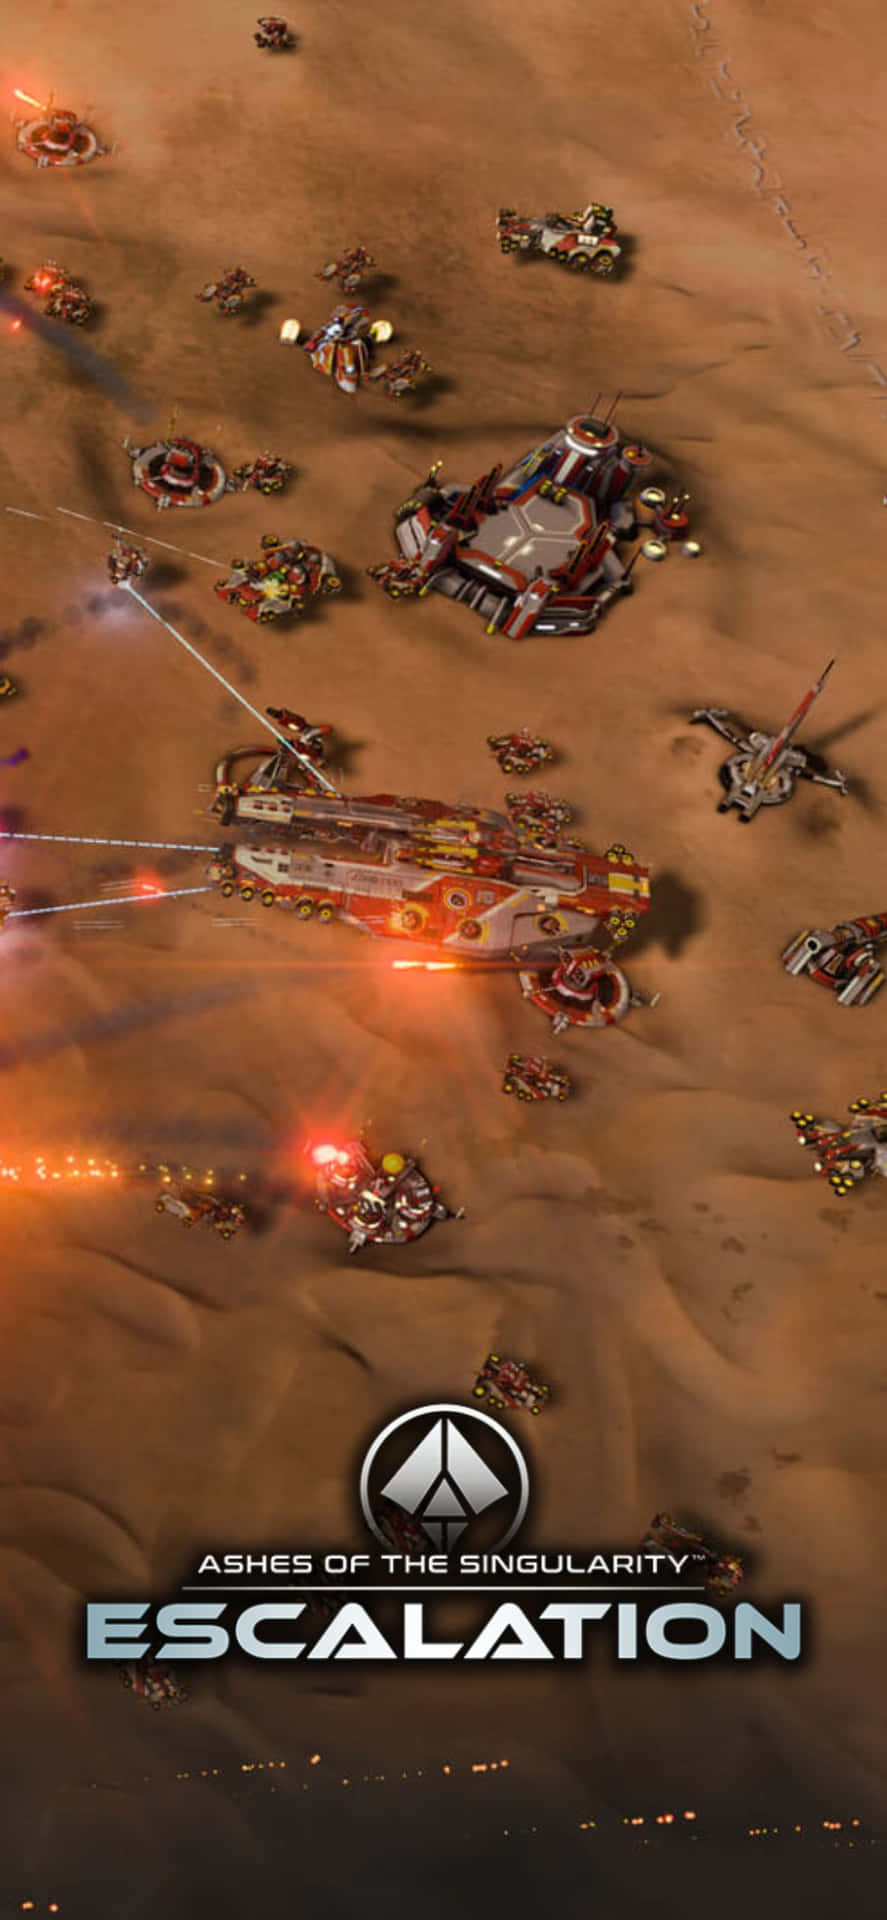 Enter the Intense High-Tech World of Ashes of the Singularity Escalation